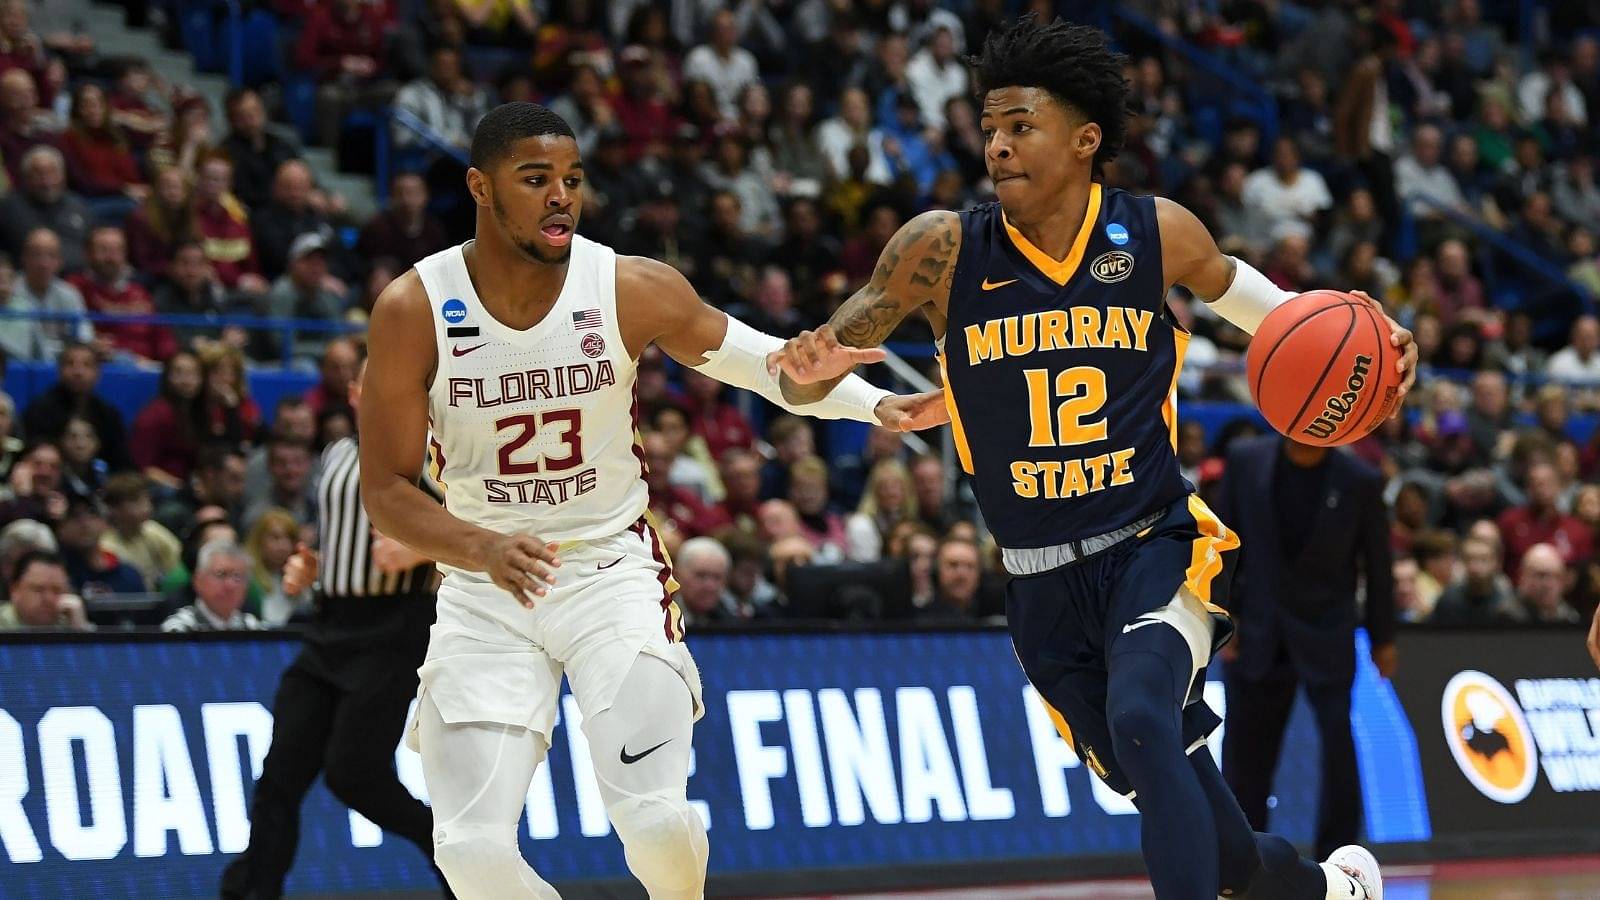 Murray State suddenly became a threat to top contenders in the NCAA championship in 2019 with Ja Morant leading them from the front.